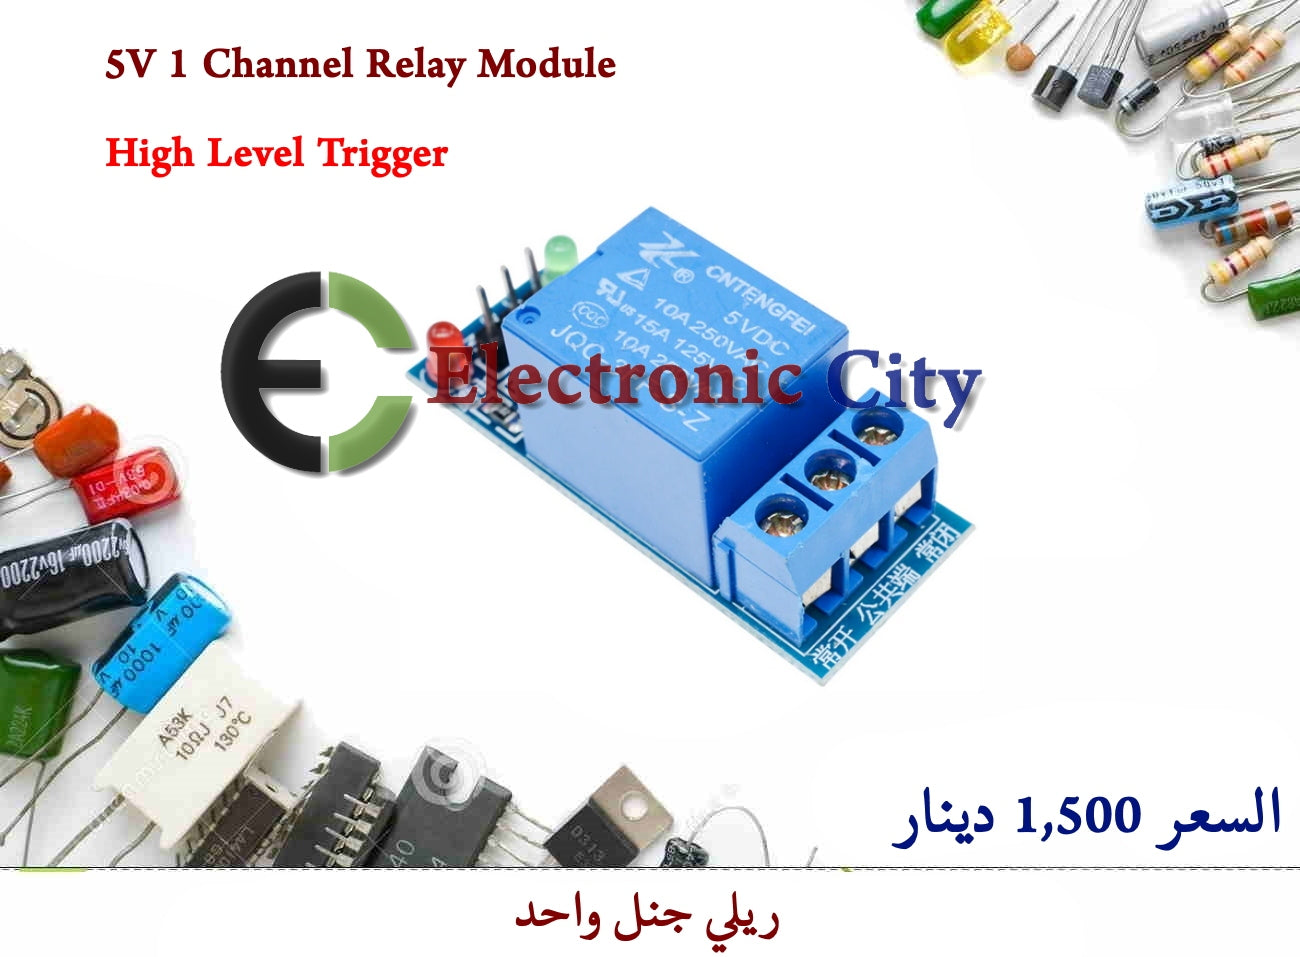 5V 1 Channel Relay Module High Level Trigger #M6 012485